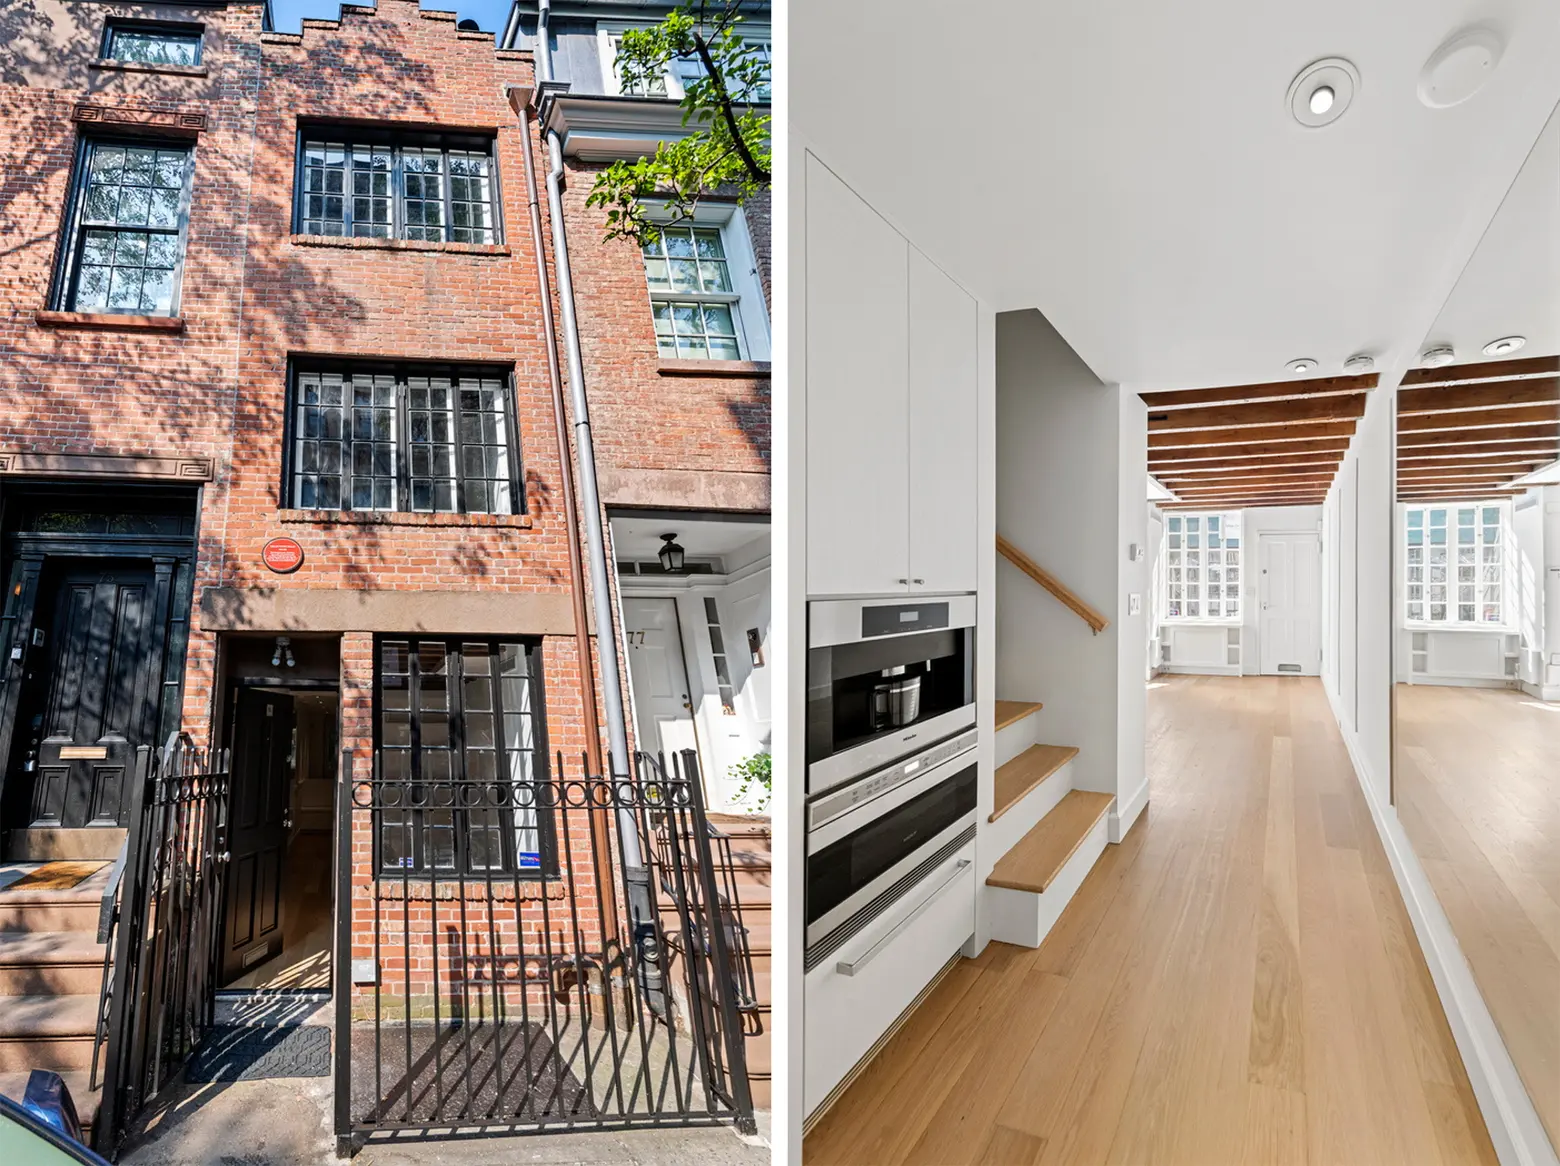 NYC’s famous skinny house in Greenwich Village last listed for $4.2M enters contract